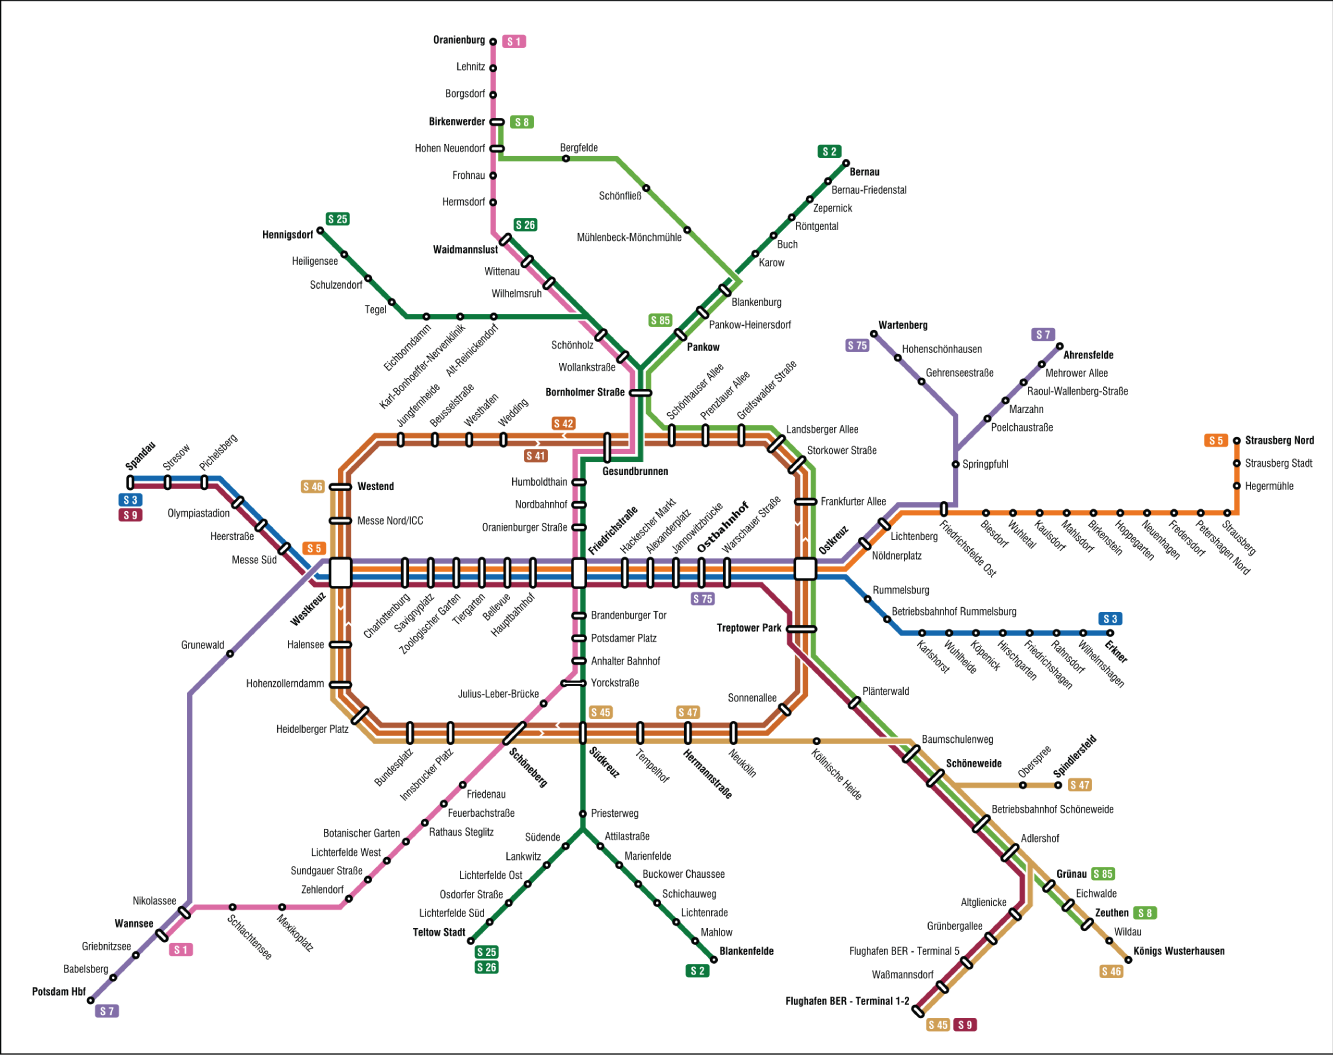 Schematic illustration of Map of the Berlin S-Train.